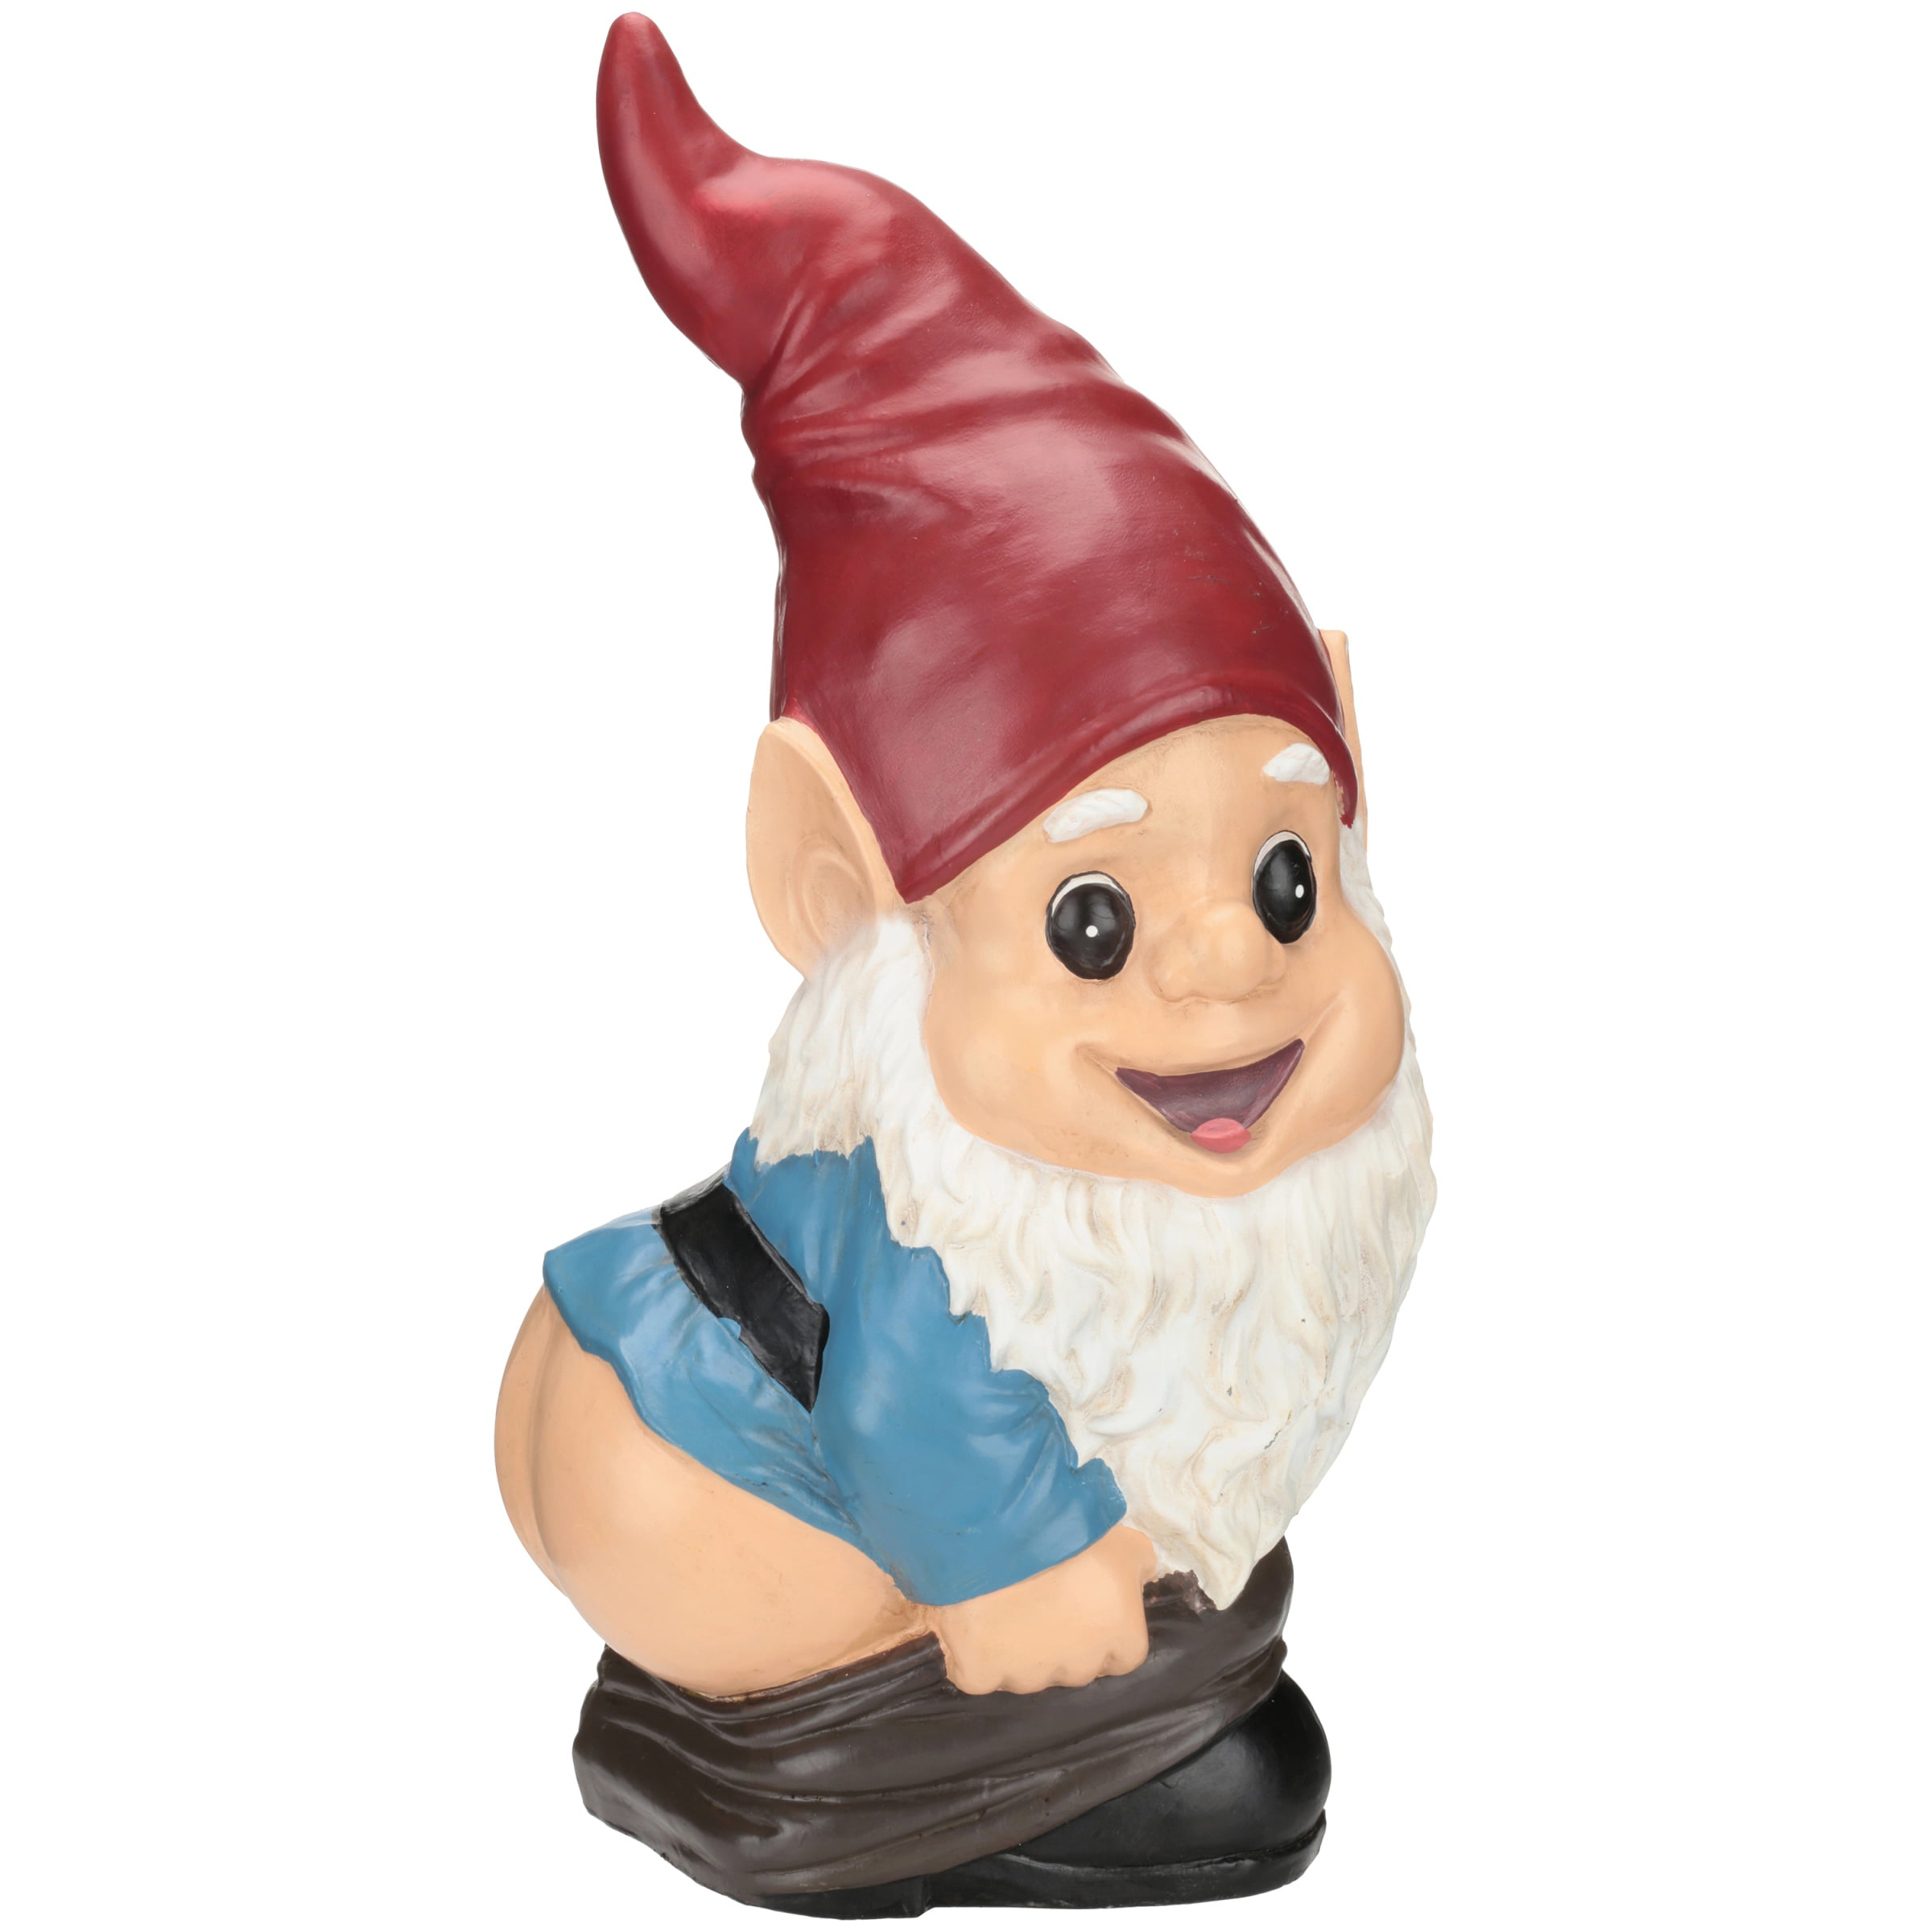 Best For Picture Of A Garden Gnome.